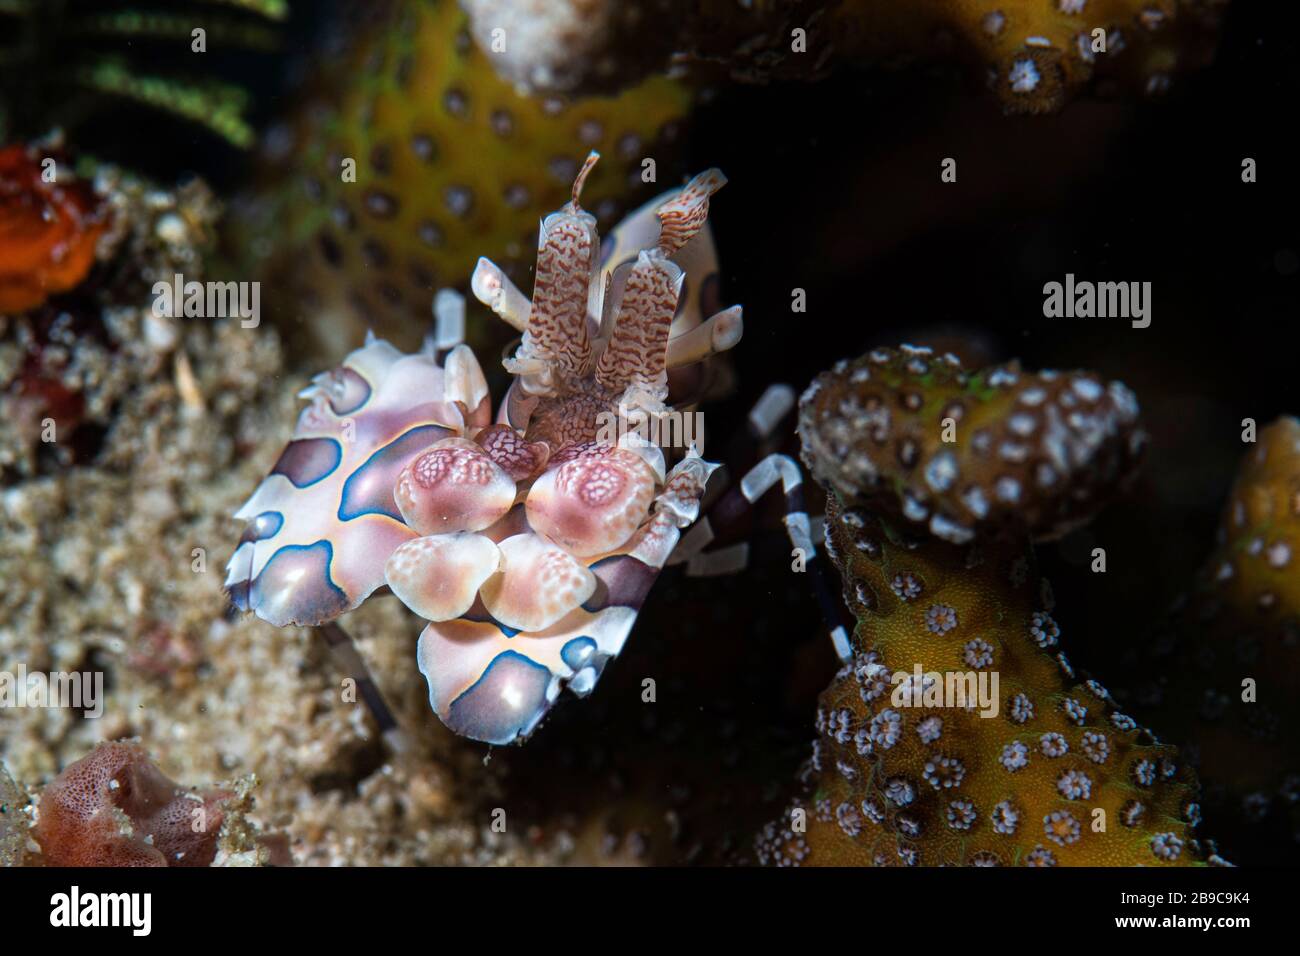 A harlequin shrimp hides under coral rubble from its predators. Stock Photo